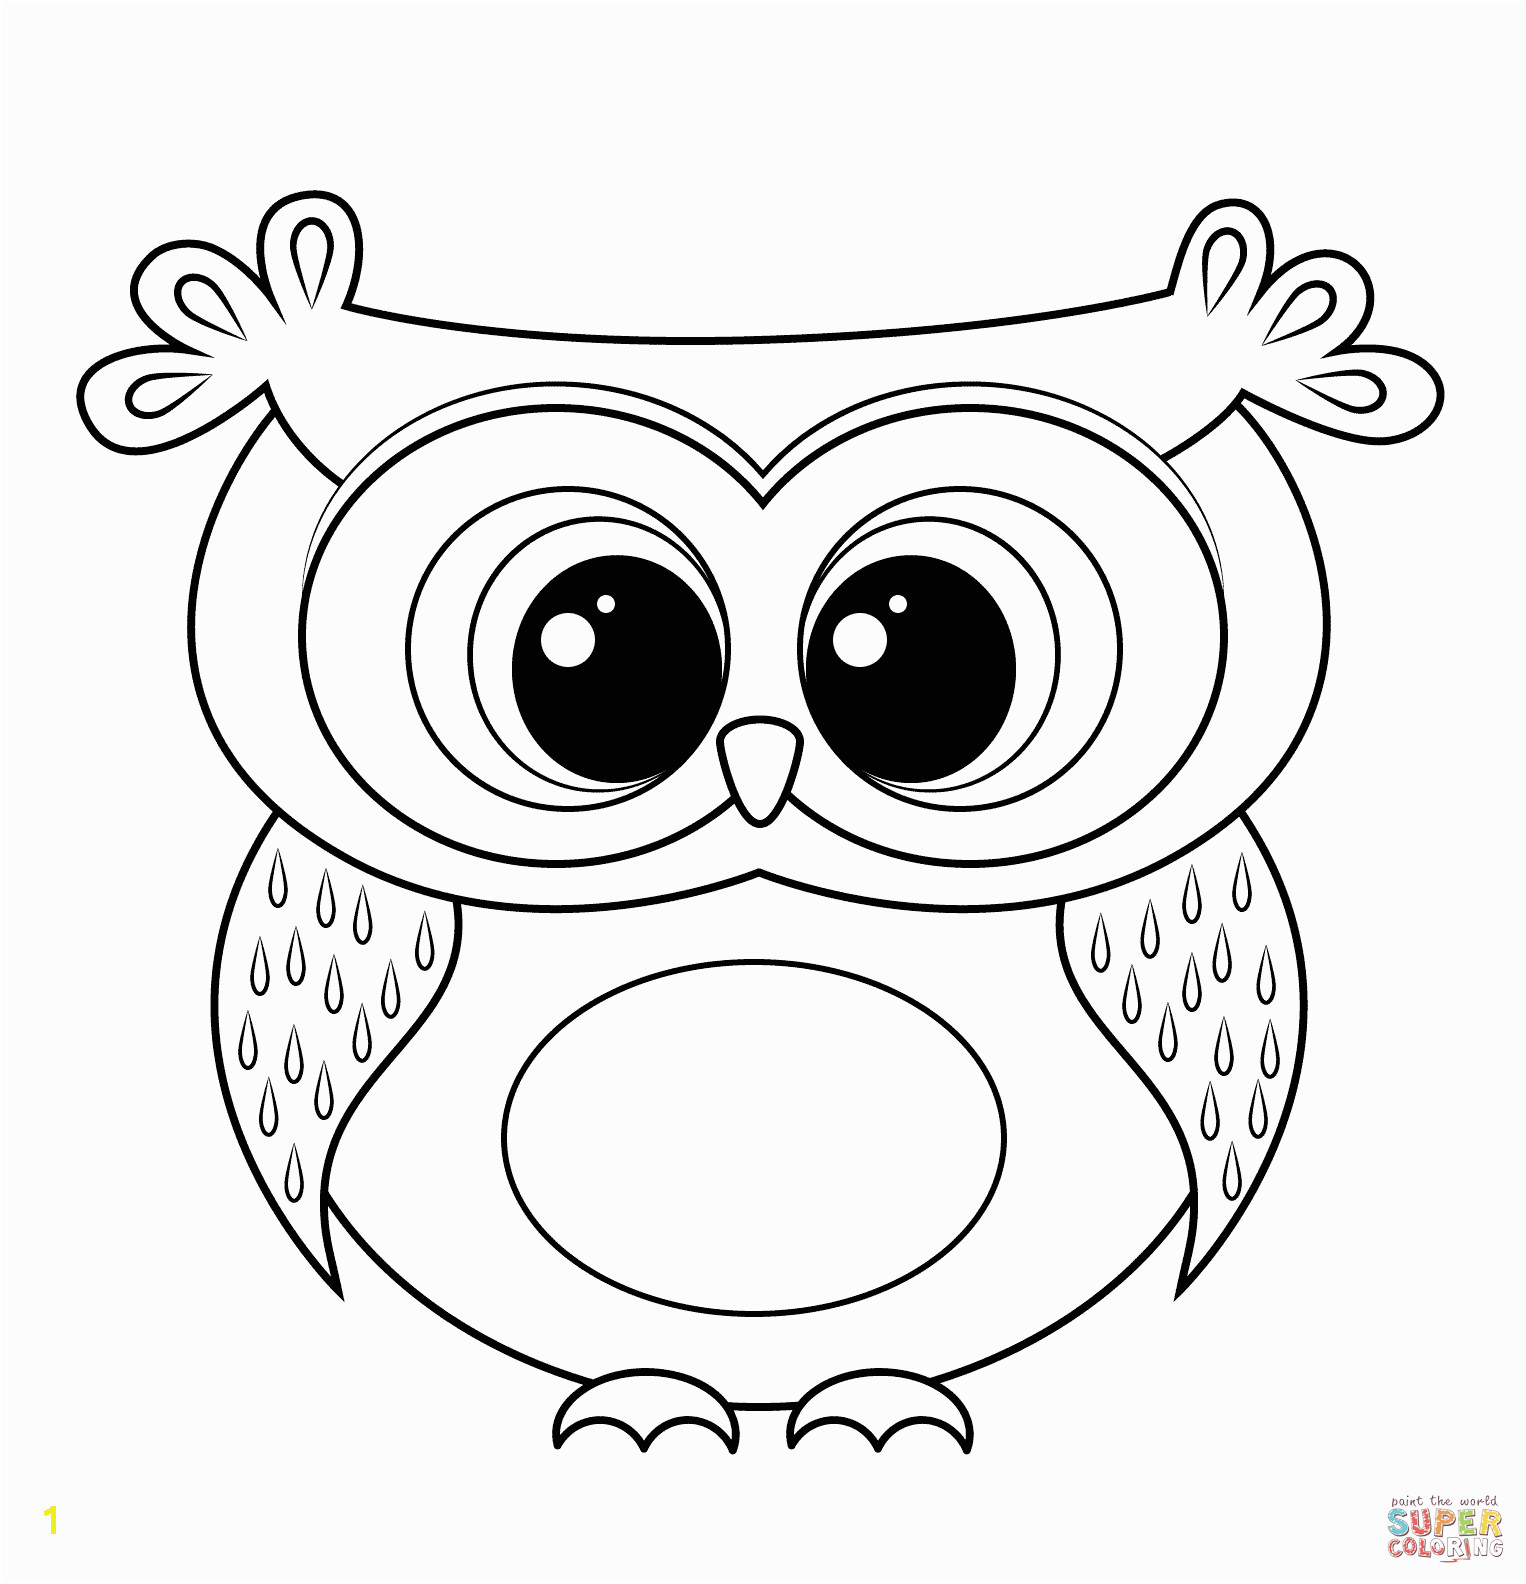 Coloring Pages Owls Cartoon Owl Coloring Page Free Printable Coloring Pages